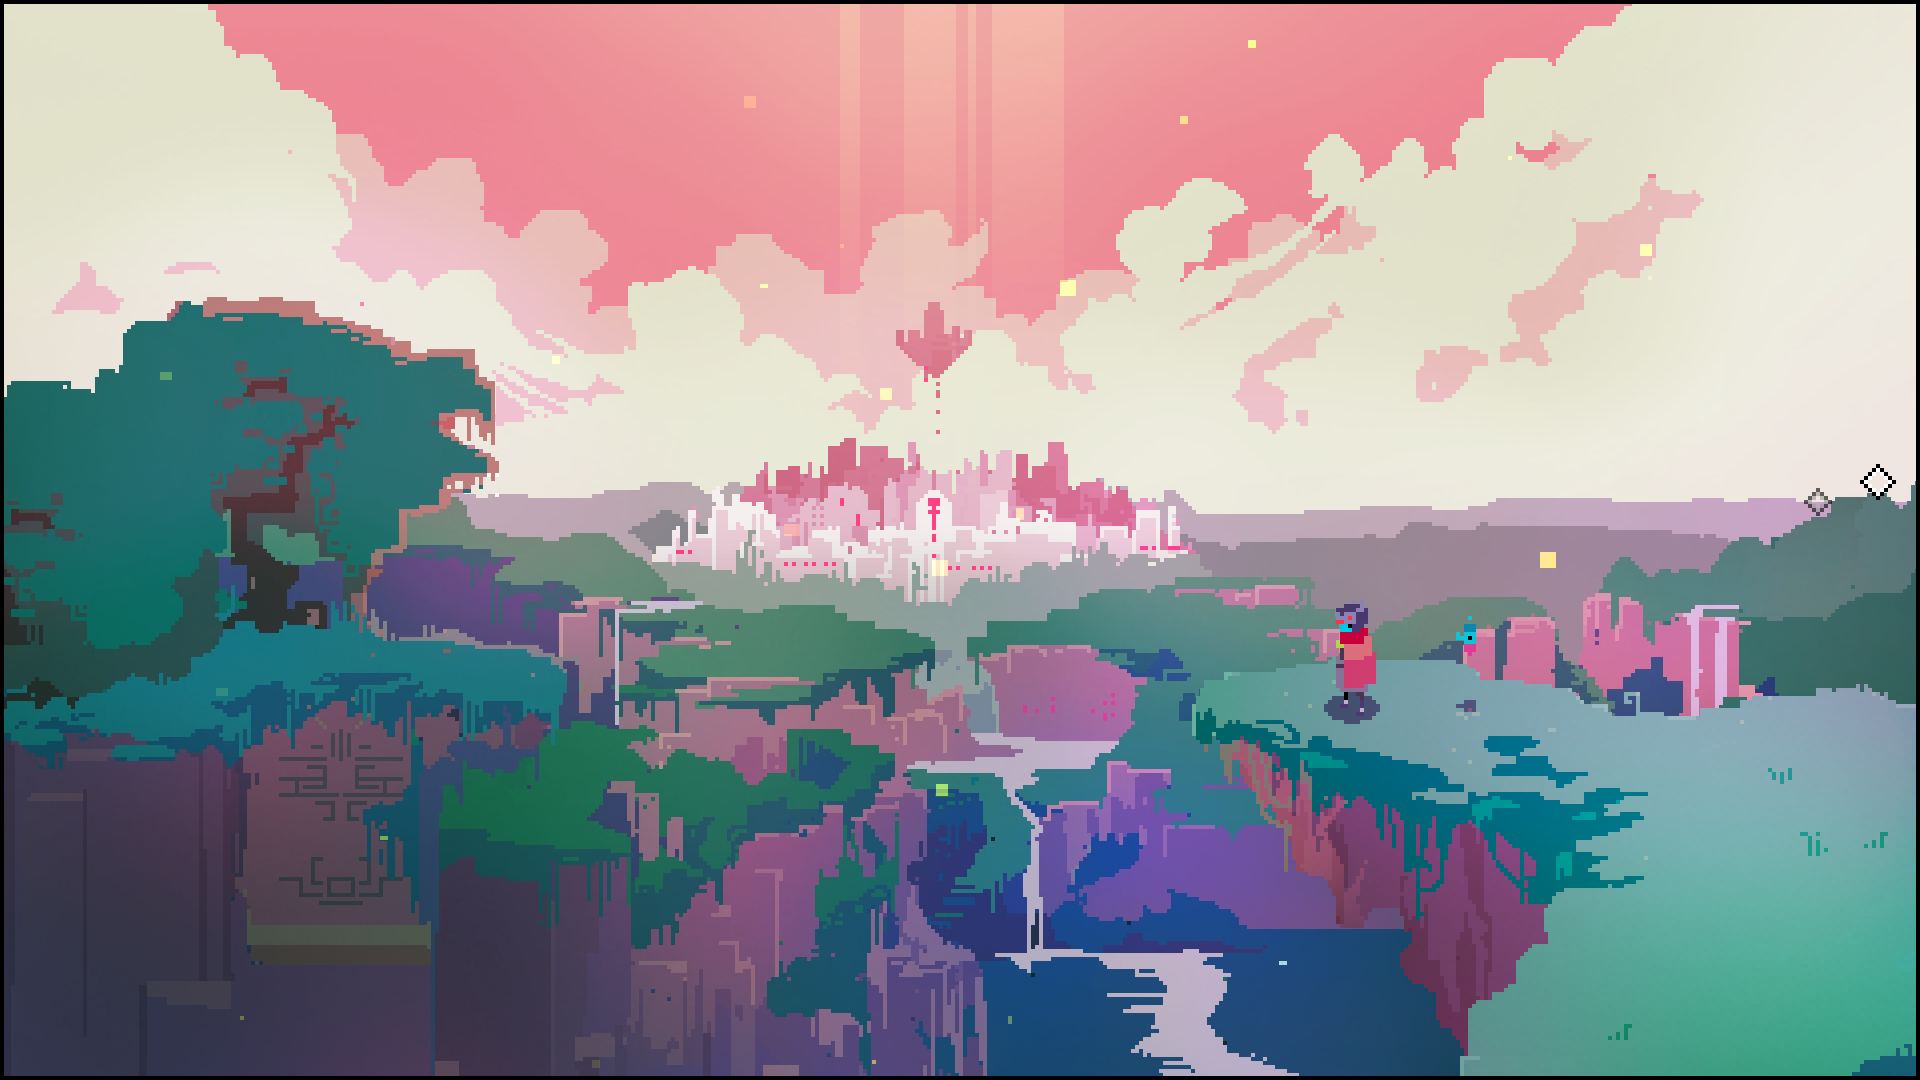 A pixelated landscape, trees and cliffs in the foreground and a shining pink city in the background